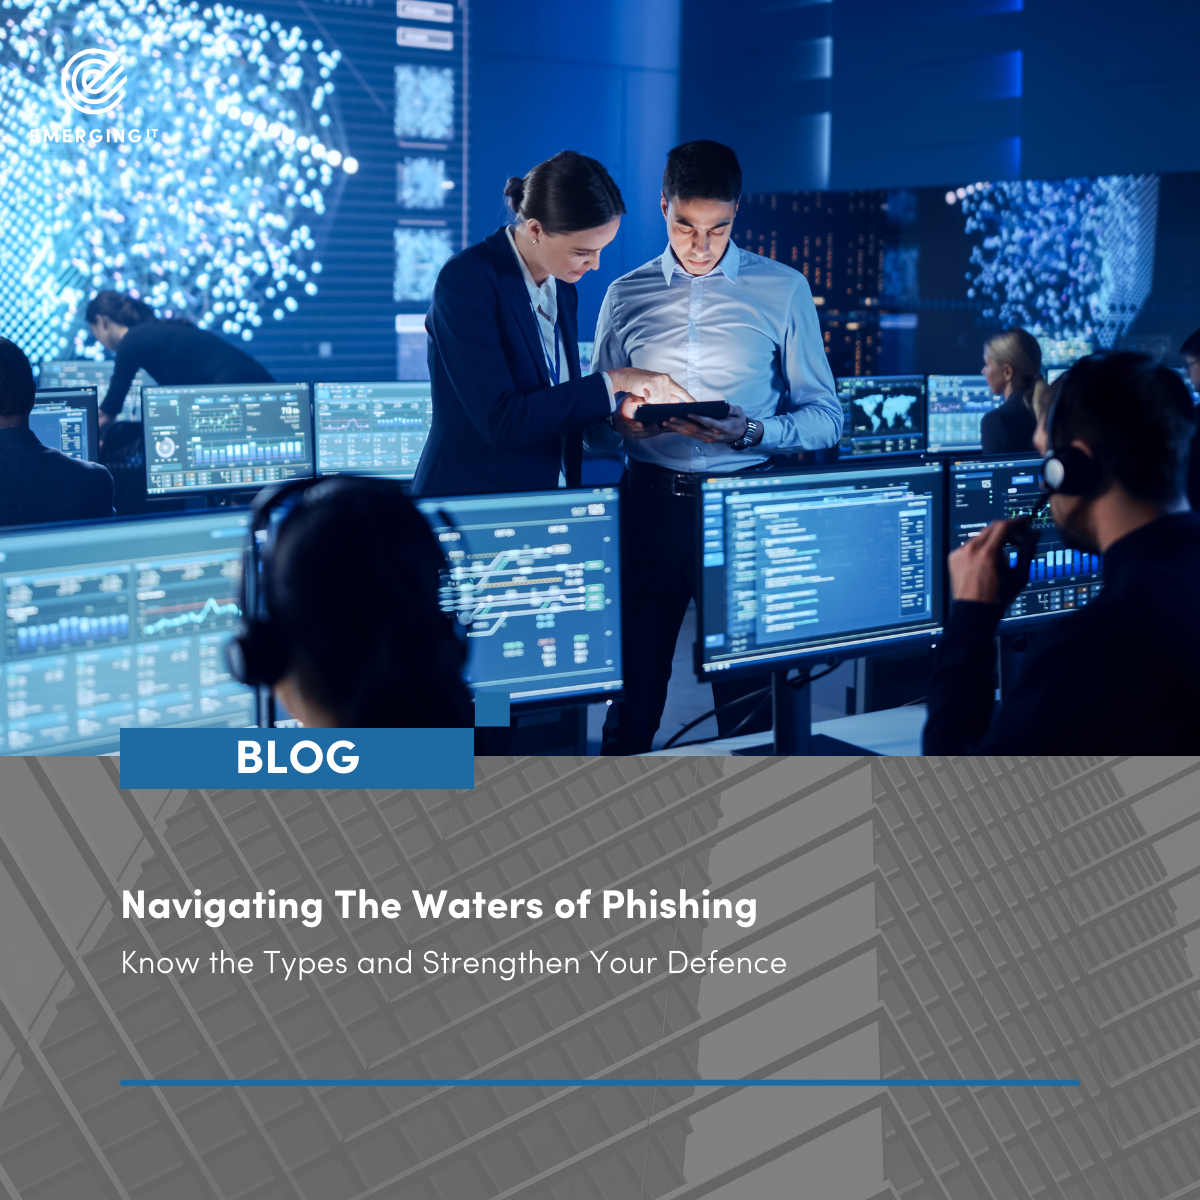 Navigating the Waters of Phishing: Know the Types and Strengthen Your Defence